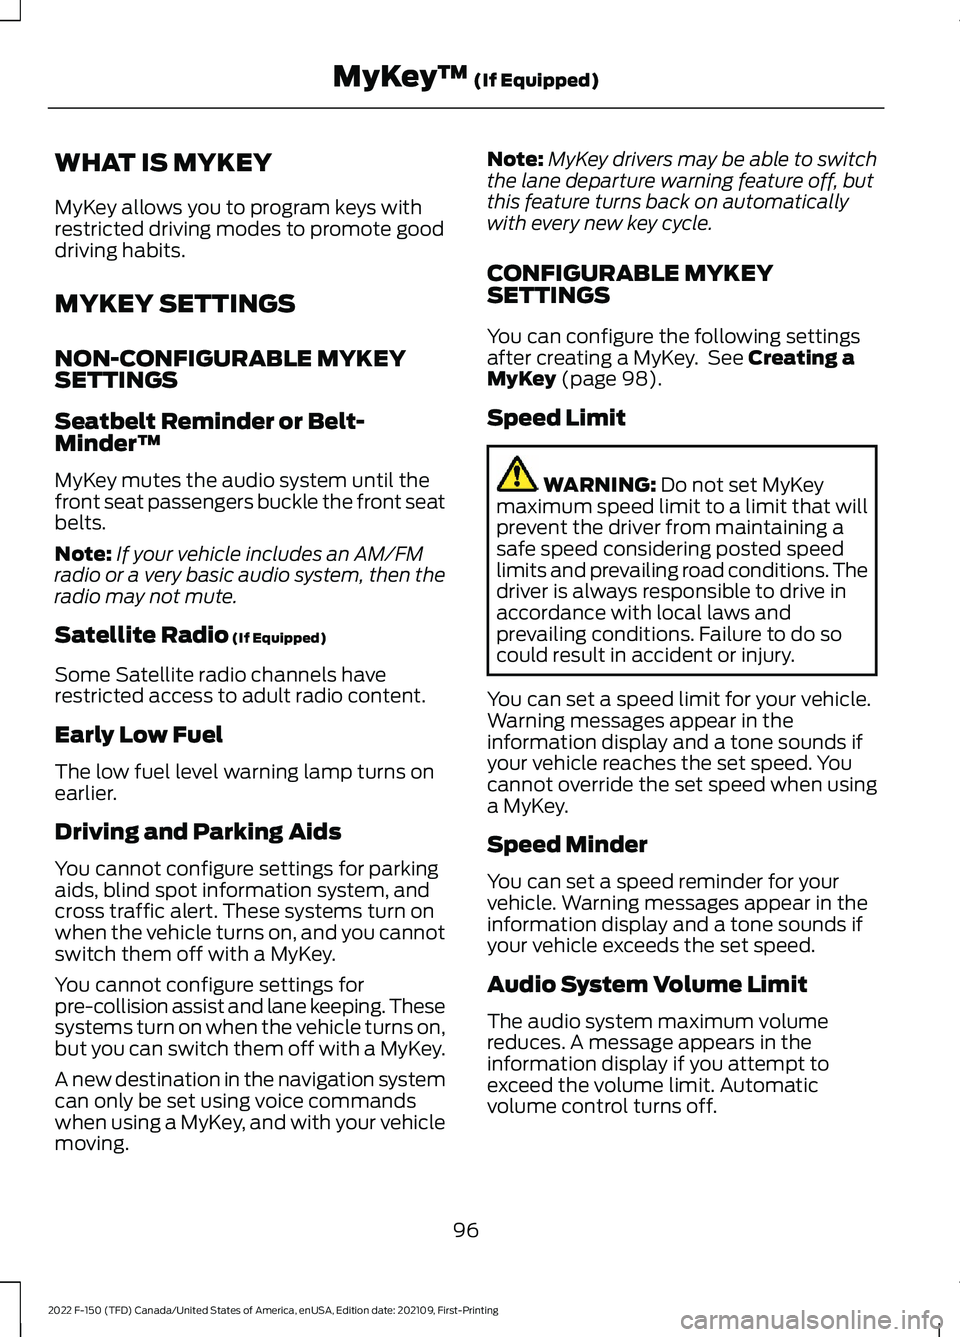 FORD F-150 2022  Owners Manual WHAT IS MYKEY
MyKey allows you to program keys with
restricted driving modes to promote good
driving habits.
MYKEY SETTINGS
NON-CONFIGURABLE MYKEY
SETTINGS
Seatbelt Reminder or Belt-
Minder™
MyKey m